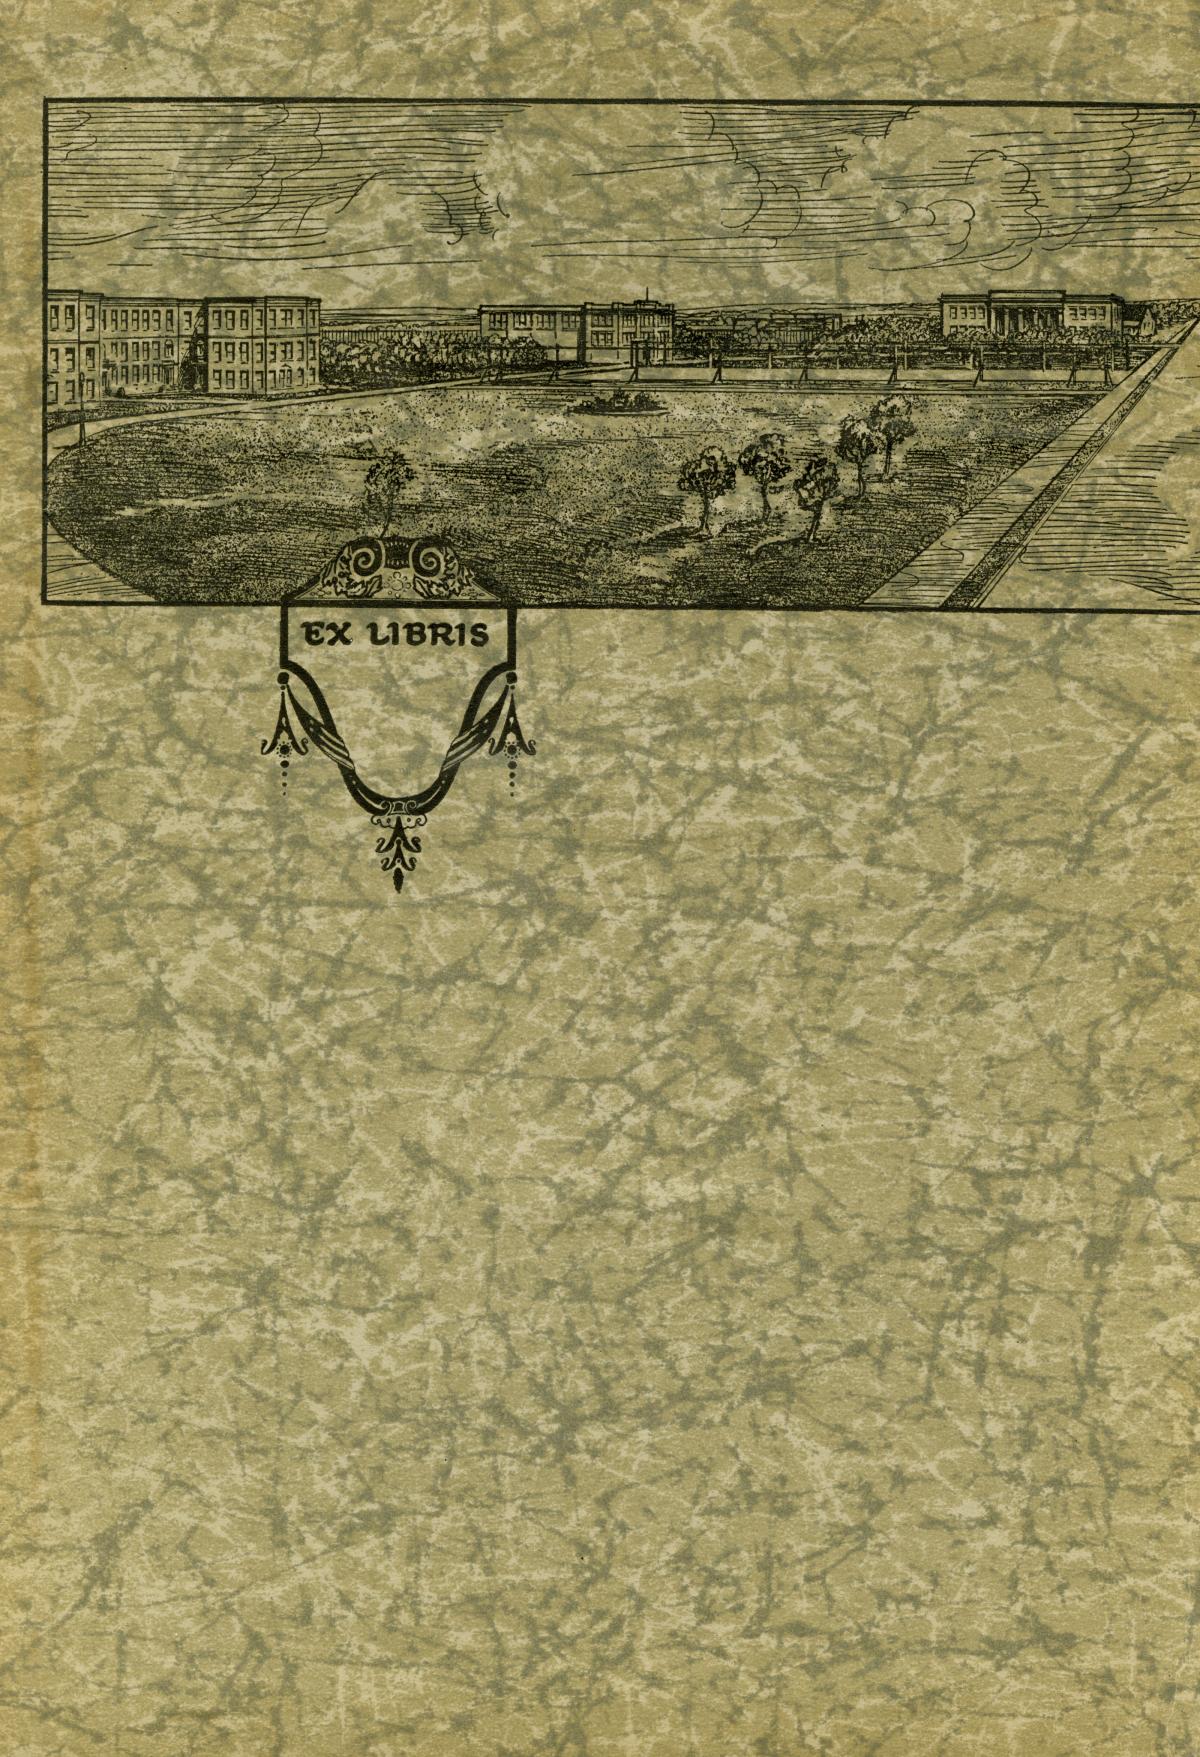 The Bronco, Yearbook of Simmons University, 1928
                                                
                                                    Front Inside
                                                